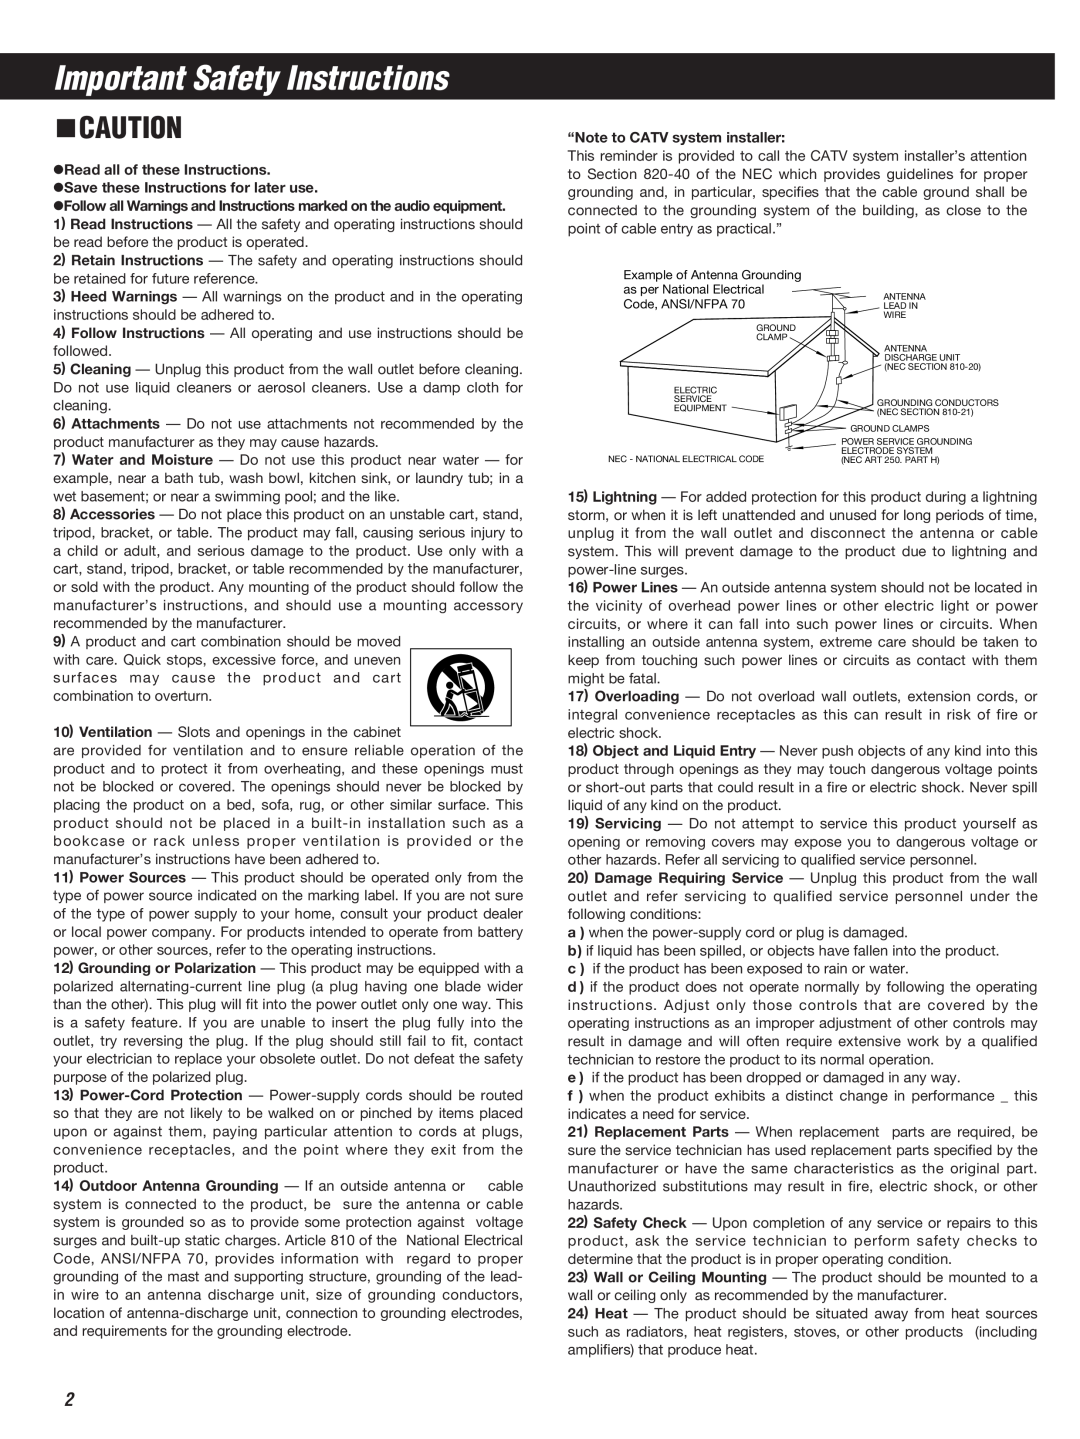 Teac W-860R owner manual Important Safety Instructions, Readall of these Instructions, Savethese Instructions for later use 